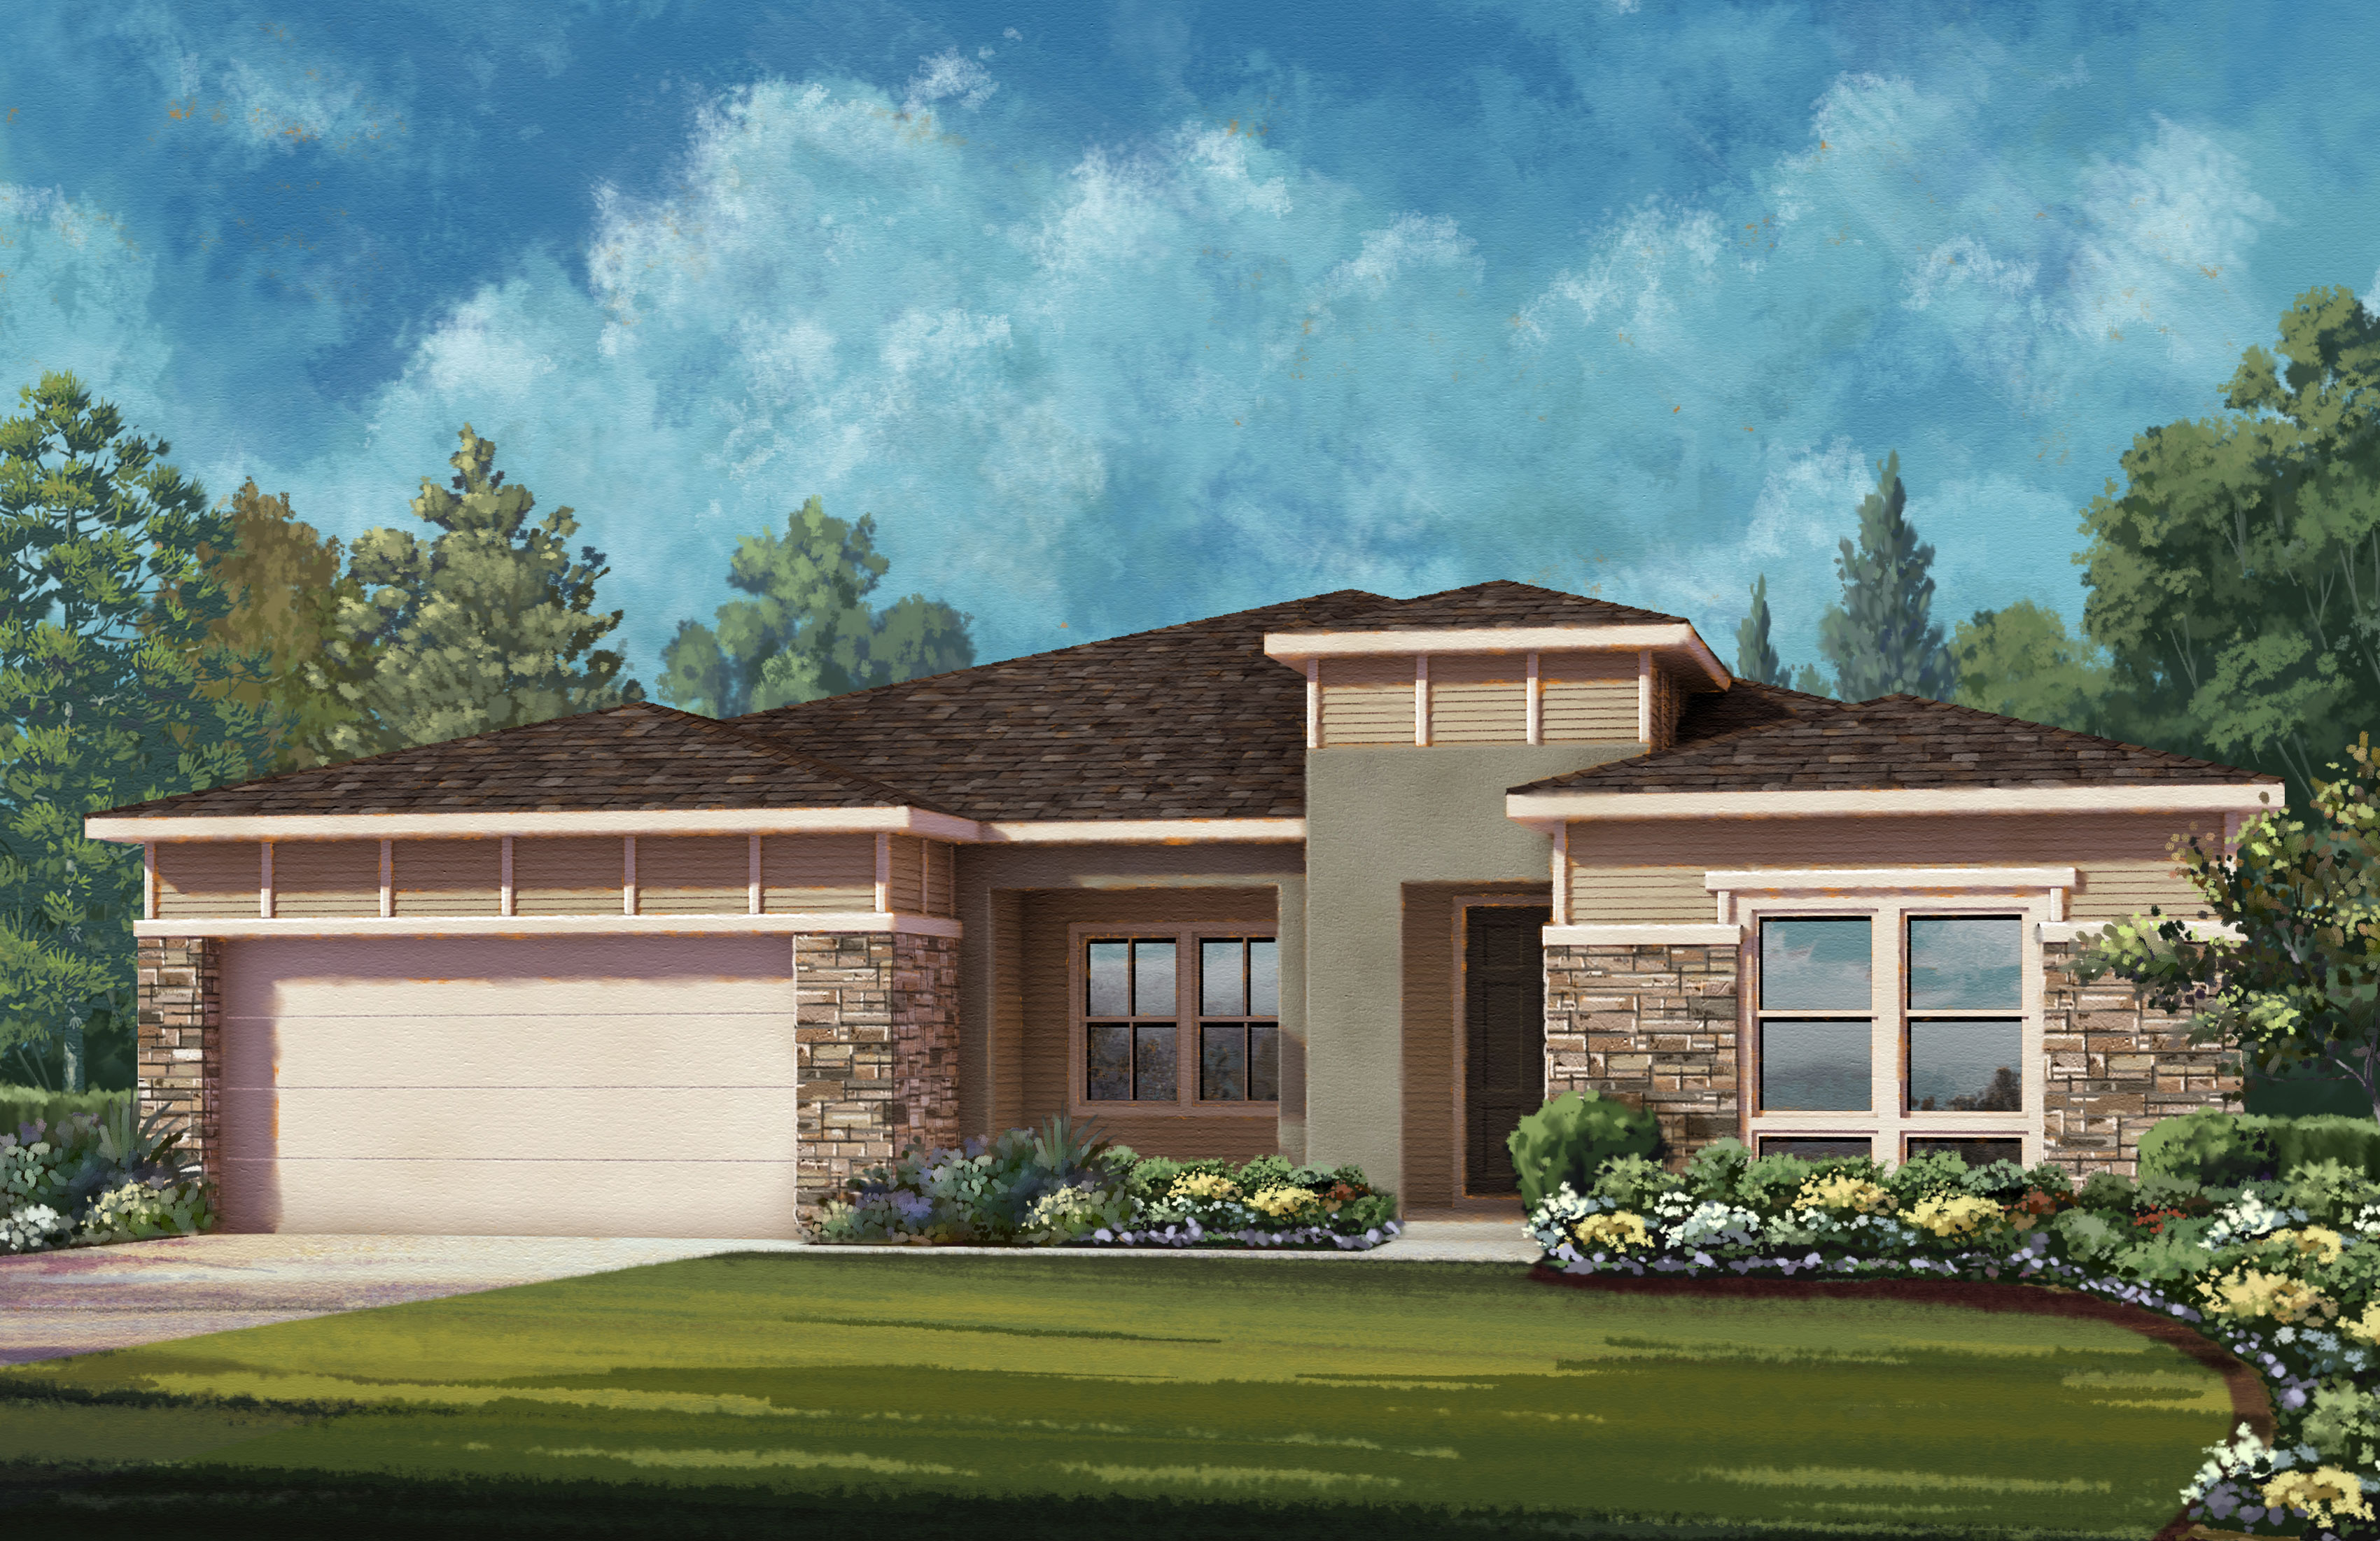 Two collections of homes will be available at the community, the Landmark and Pinnacle collections, with models to be unveiled during the grand opening weekend of February 15-16.